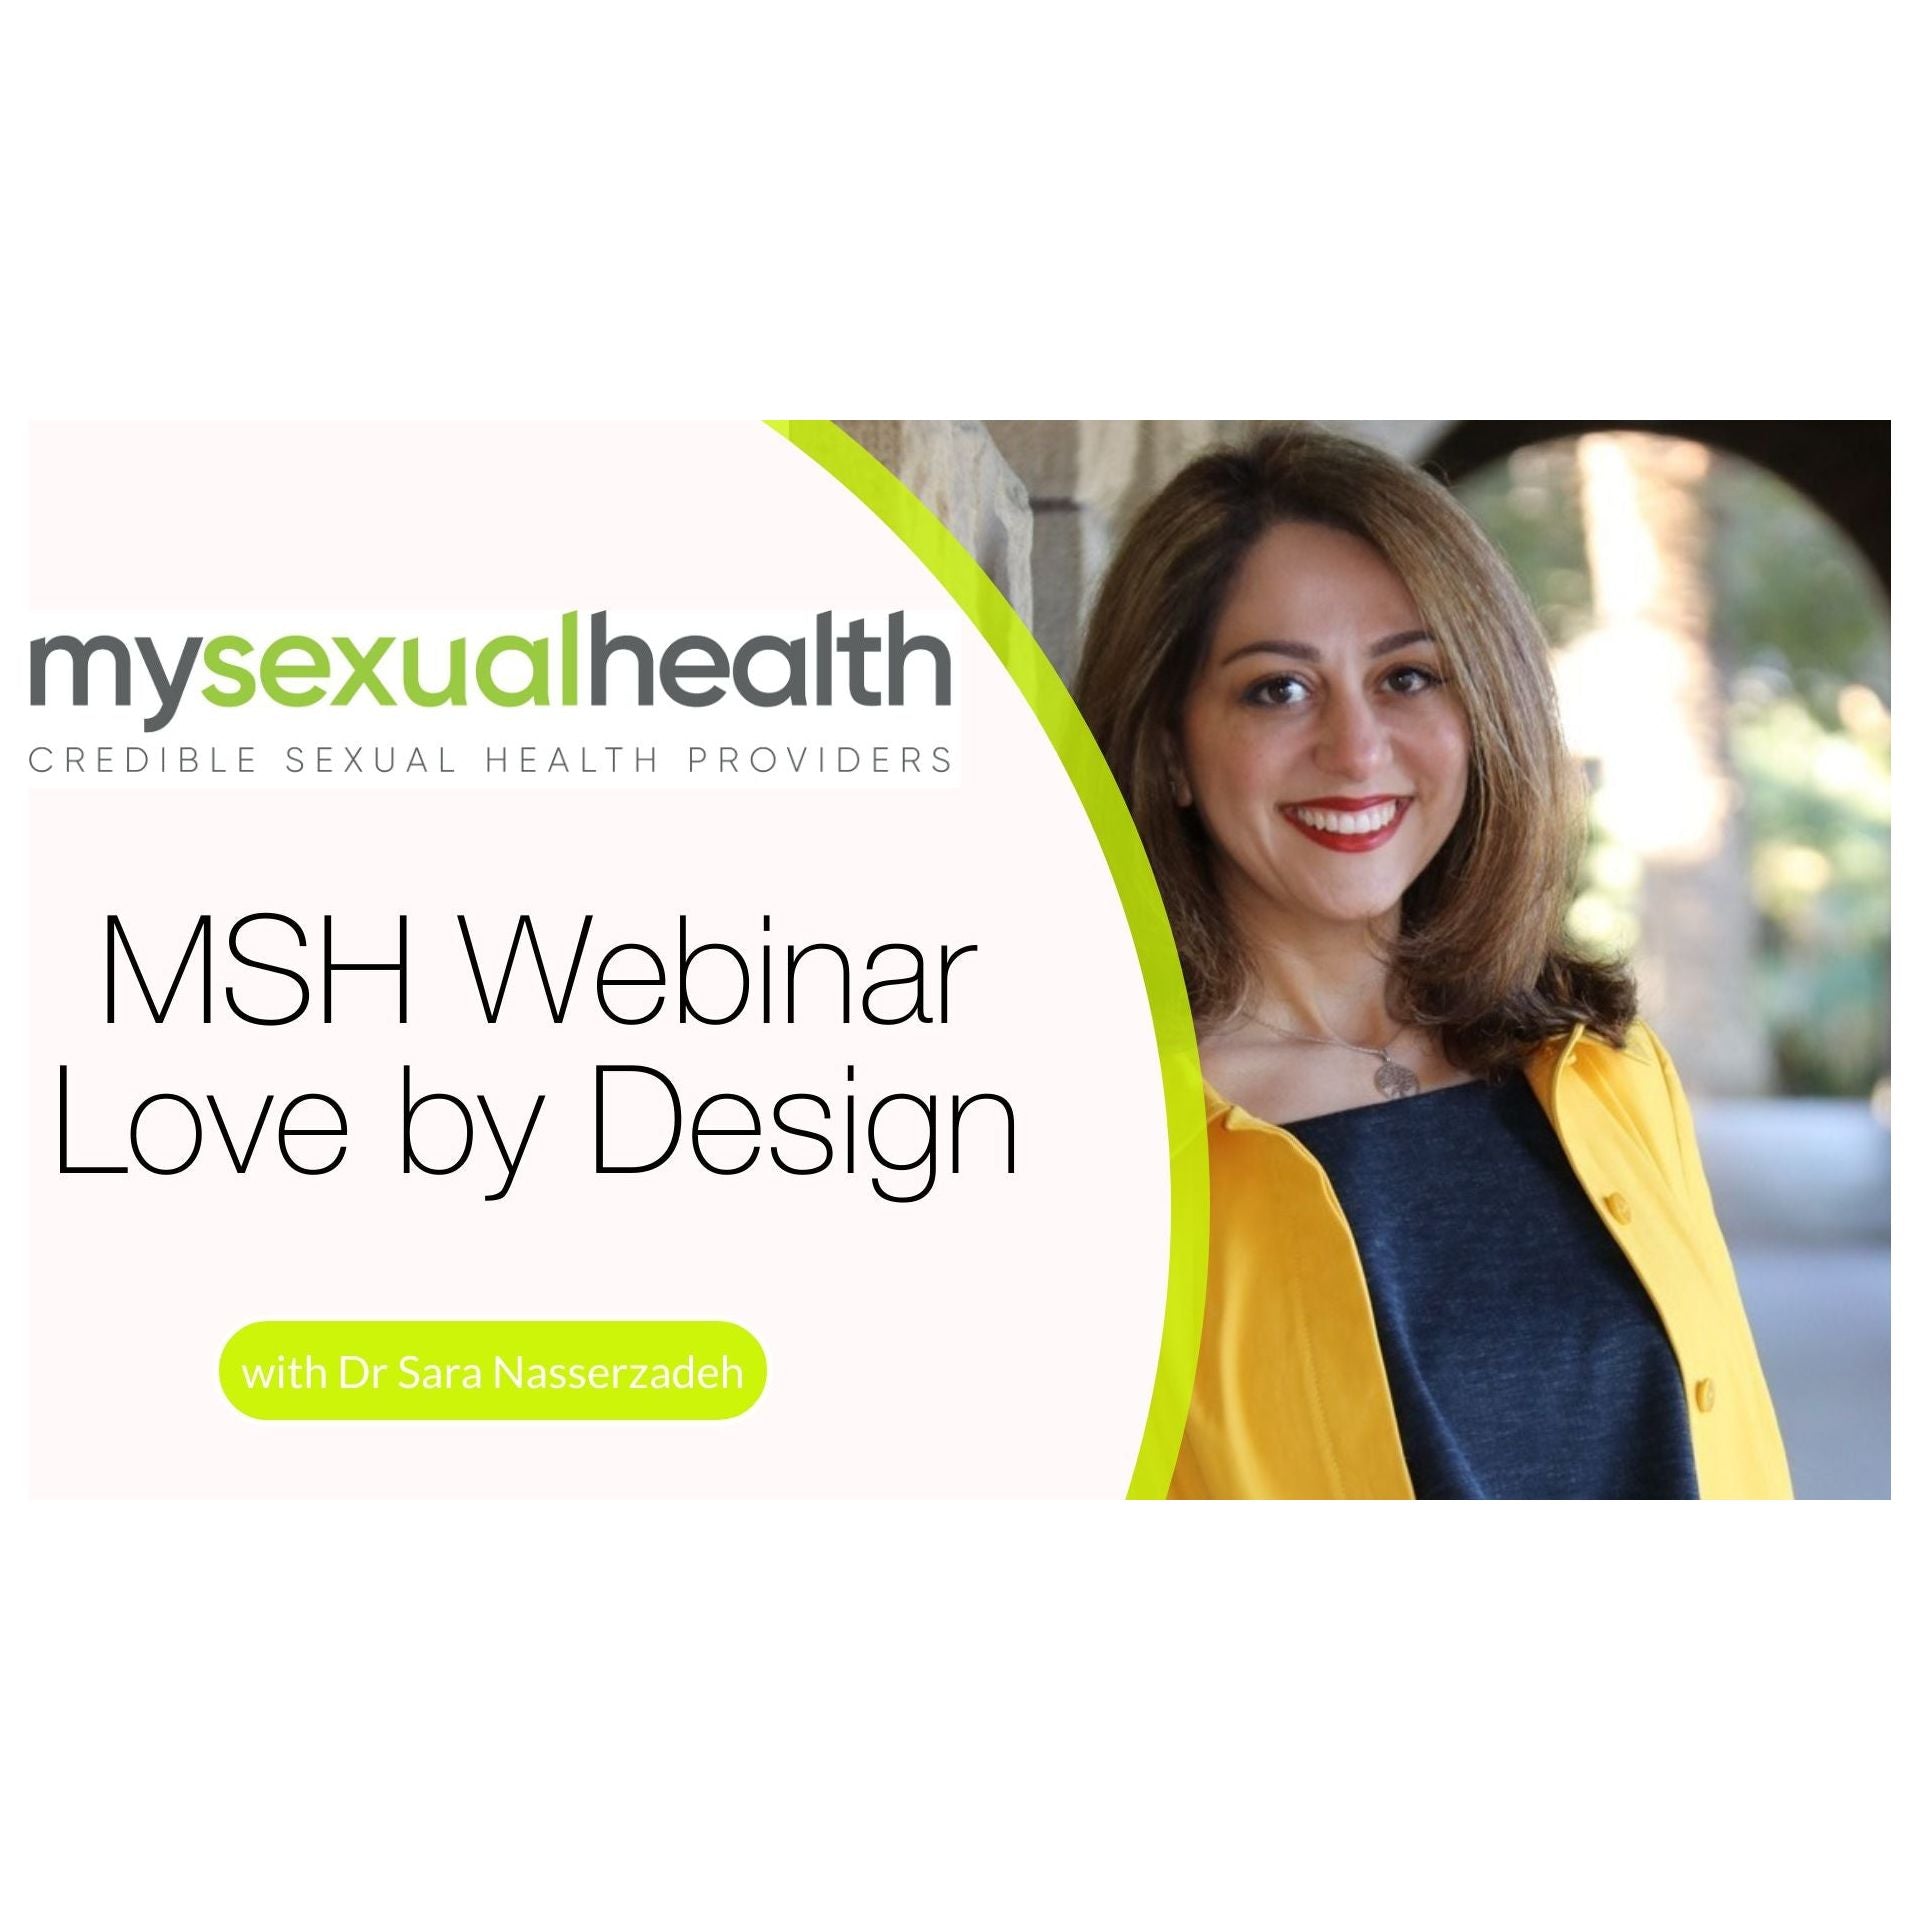 MSH WEBINAR: Love by Design with Dr Sara Nasserzadeh and Dr Elna Rudolph